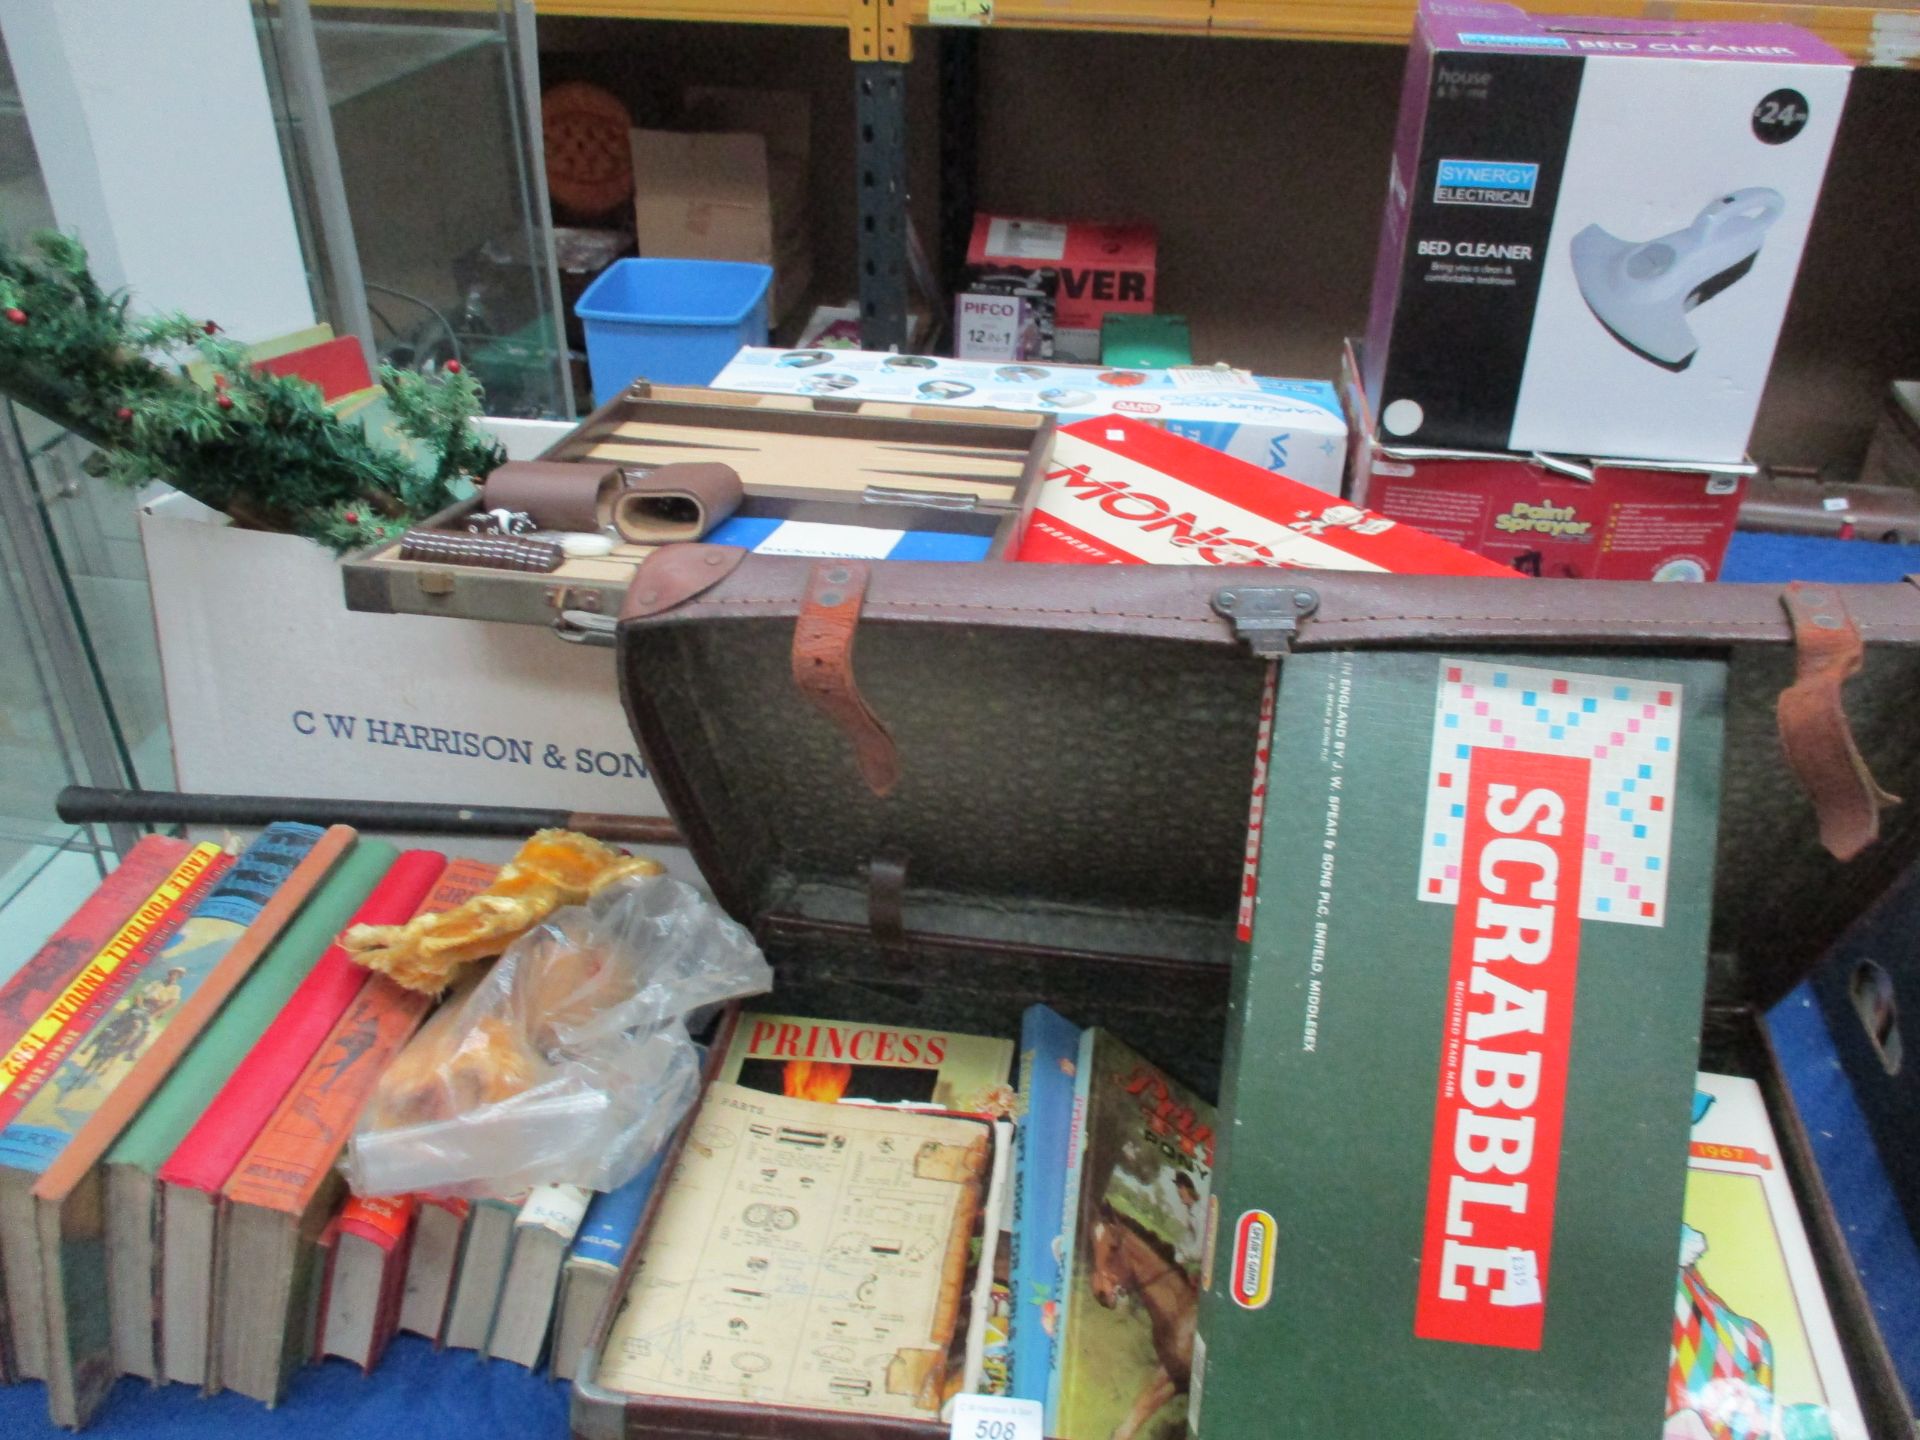 Contents to part of table - children's books and annuals, Gino Ferrari back gammon set, golf club,